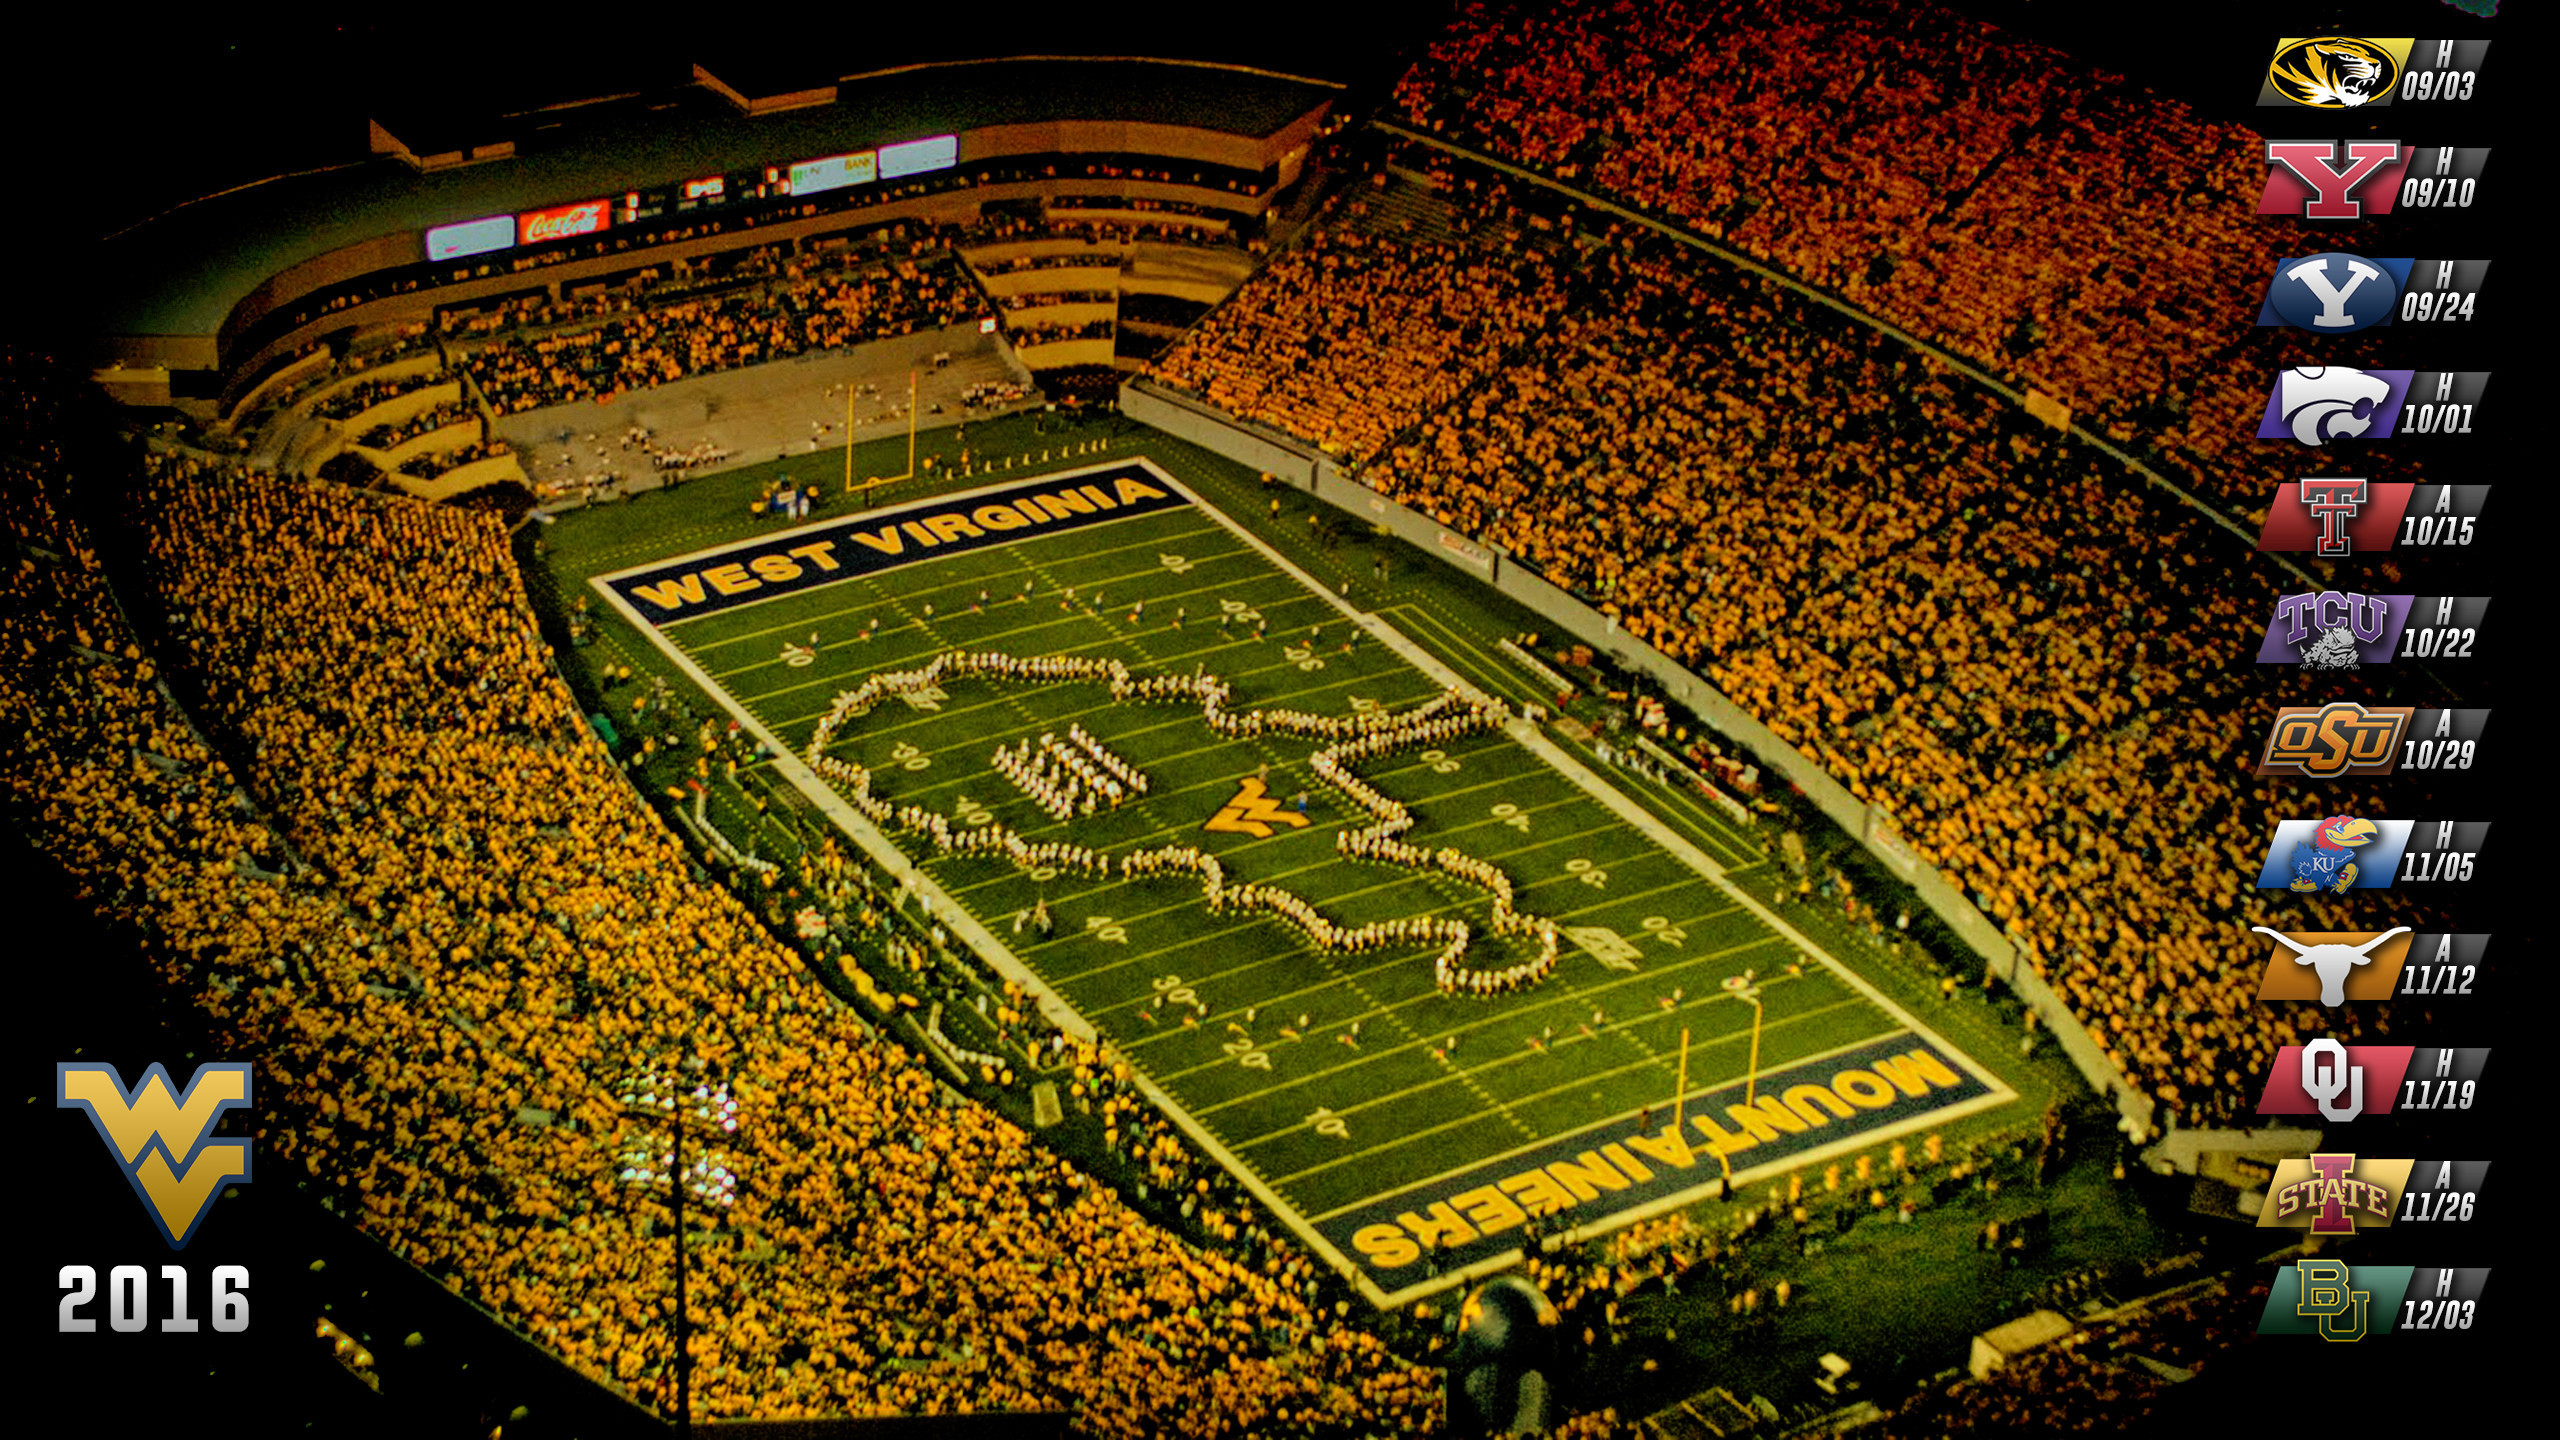 2560x1440 ... Iowa Hawkeyes Wallpapers 67 Page 2 of 3 yese69 com 4K